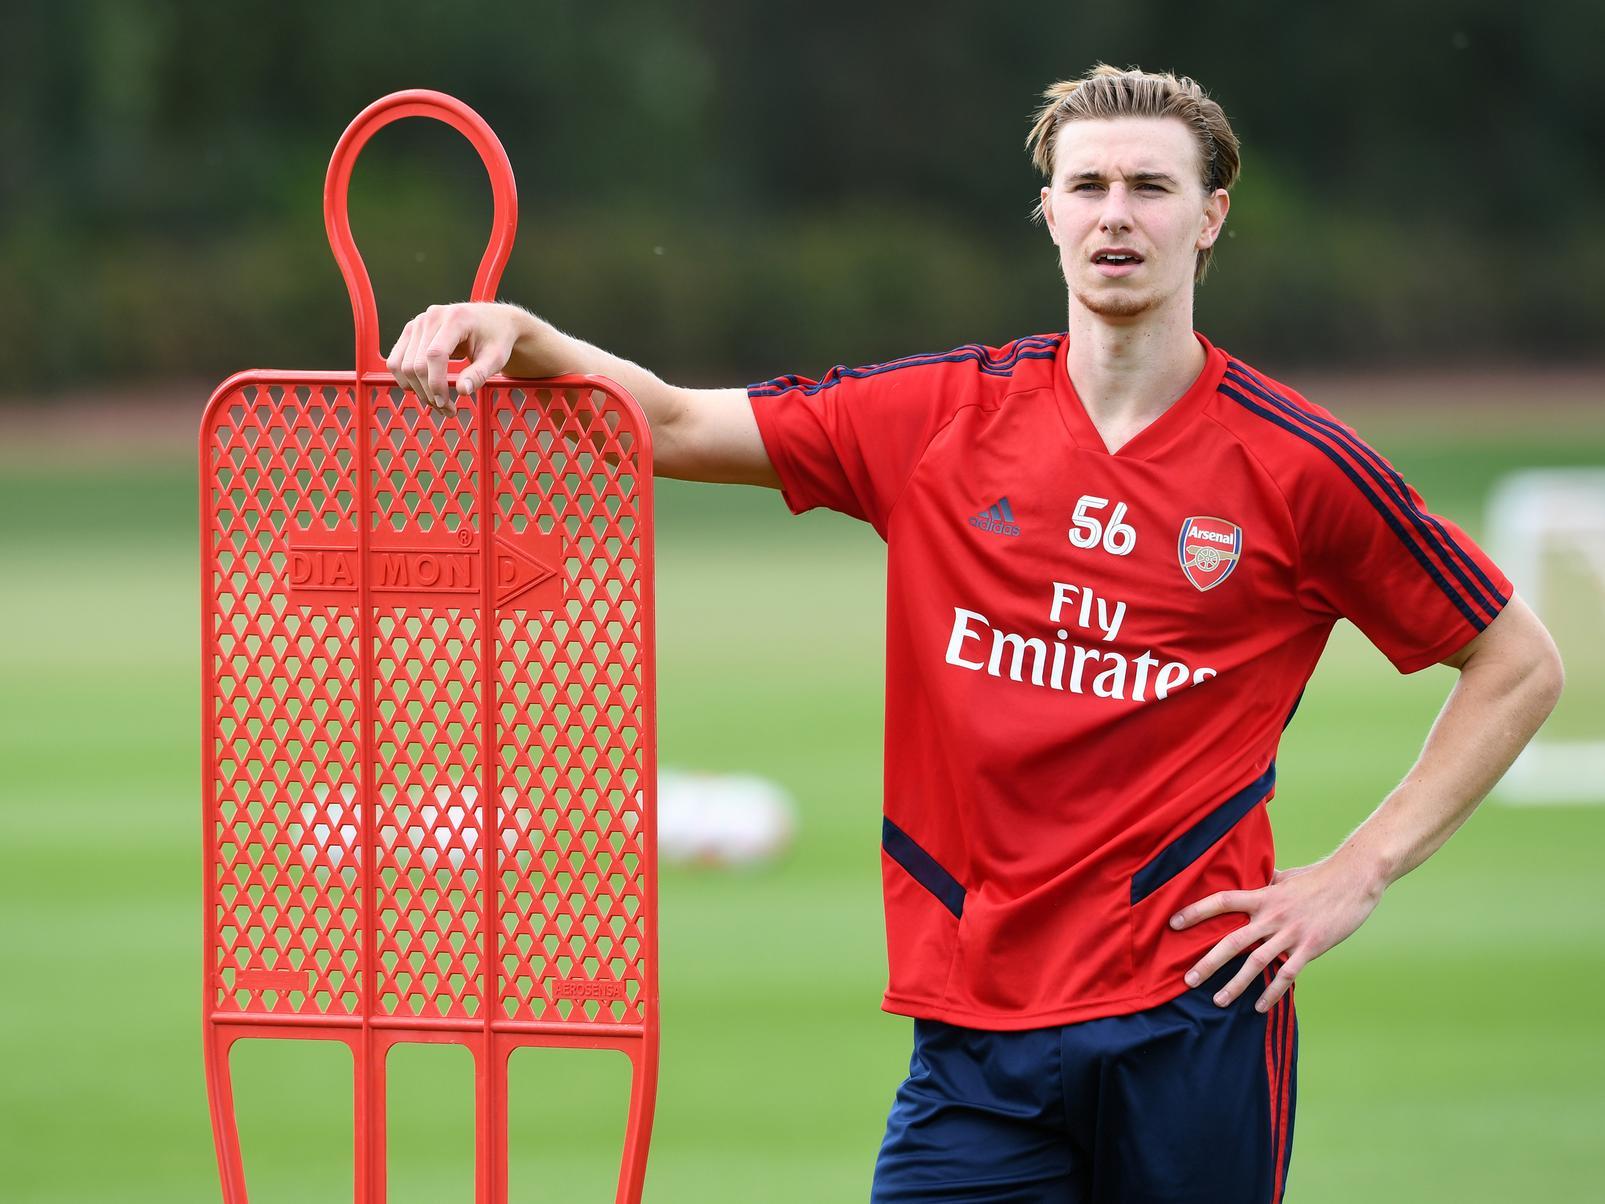 Doncaster Rovers have extended the loan of Arsenal youngster Ben Sheaf until the end of the season. (Doncaster Free Press)